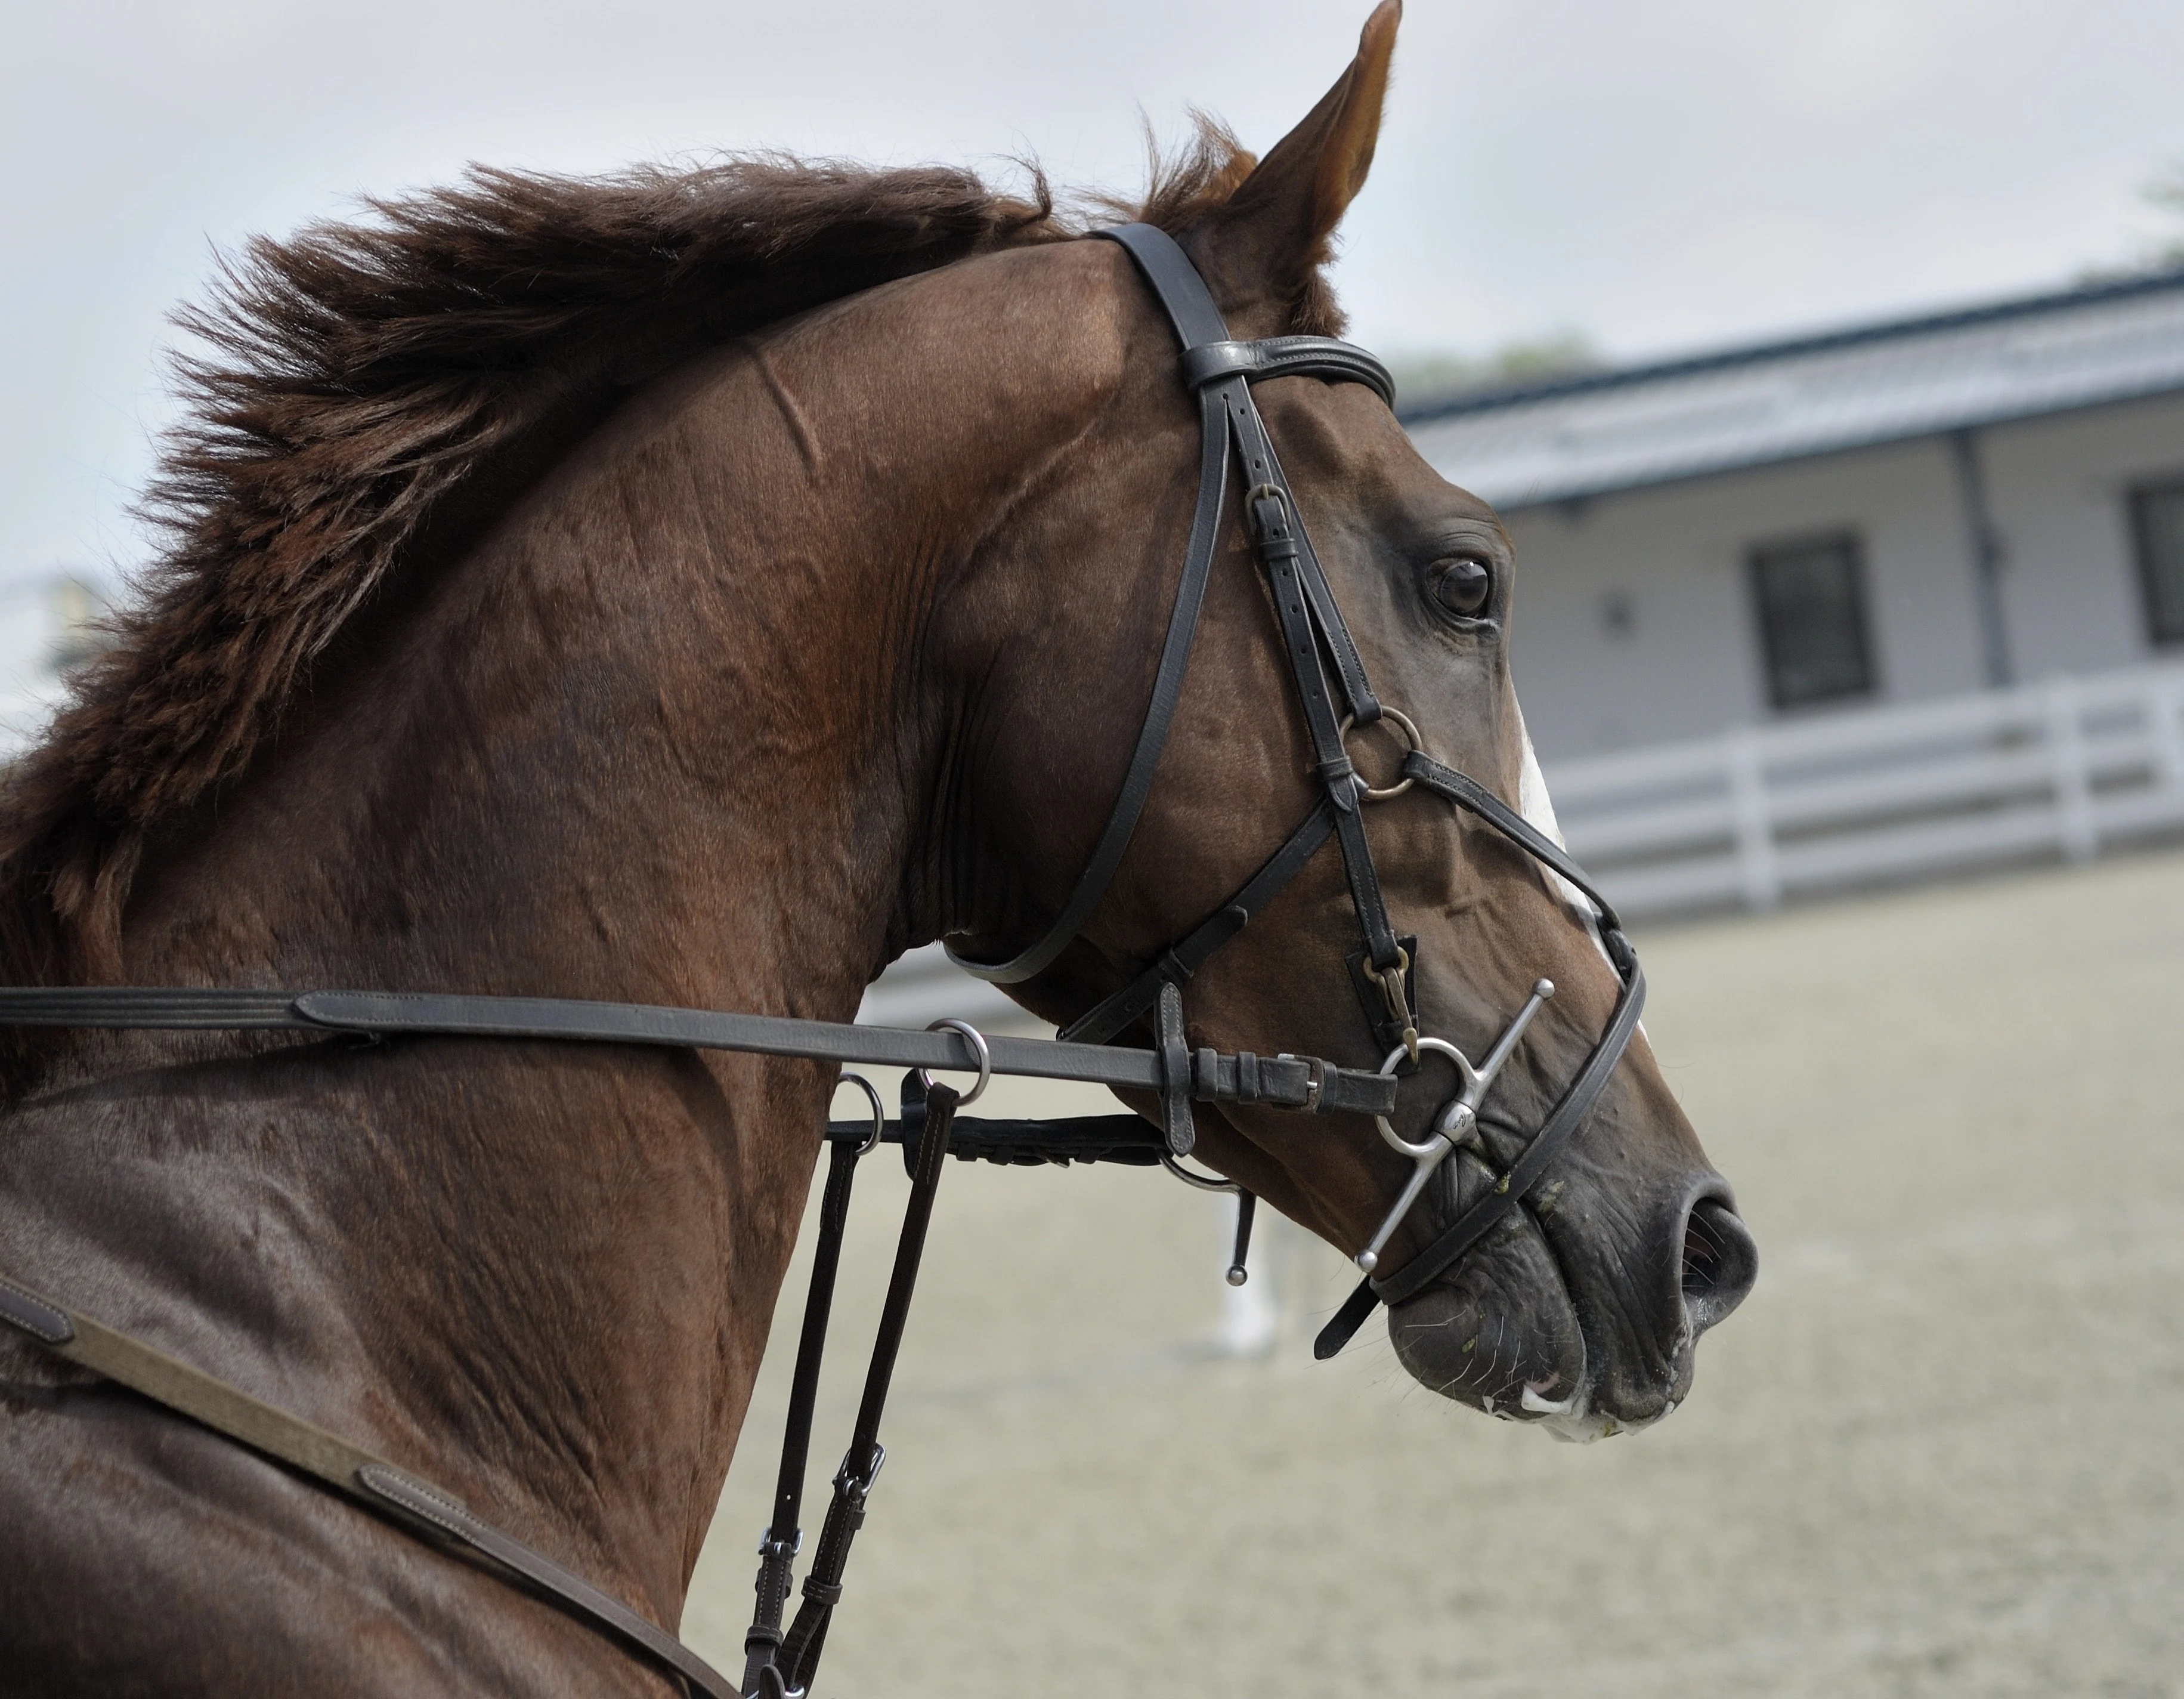 A full cheek snaffle in use without keepers